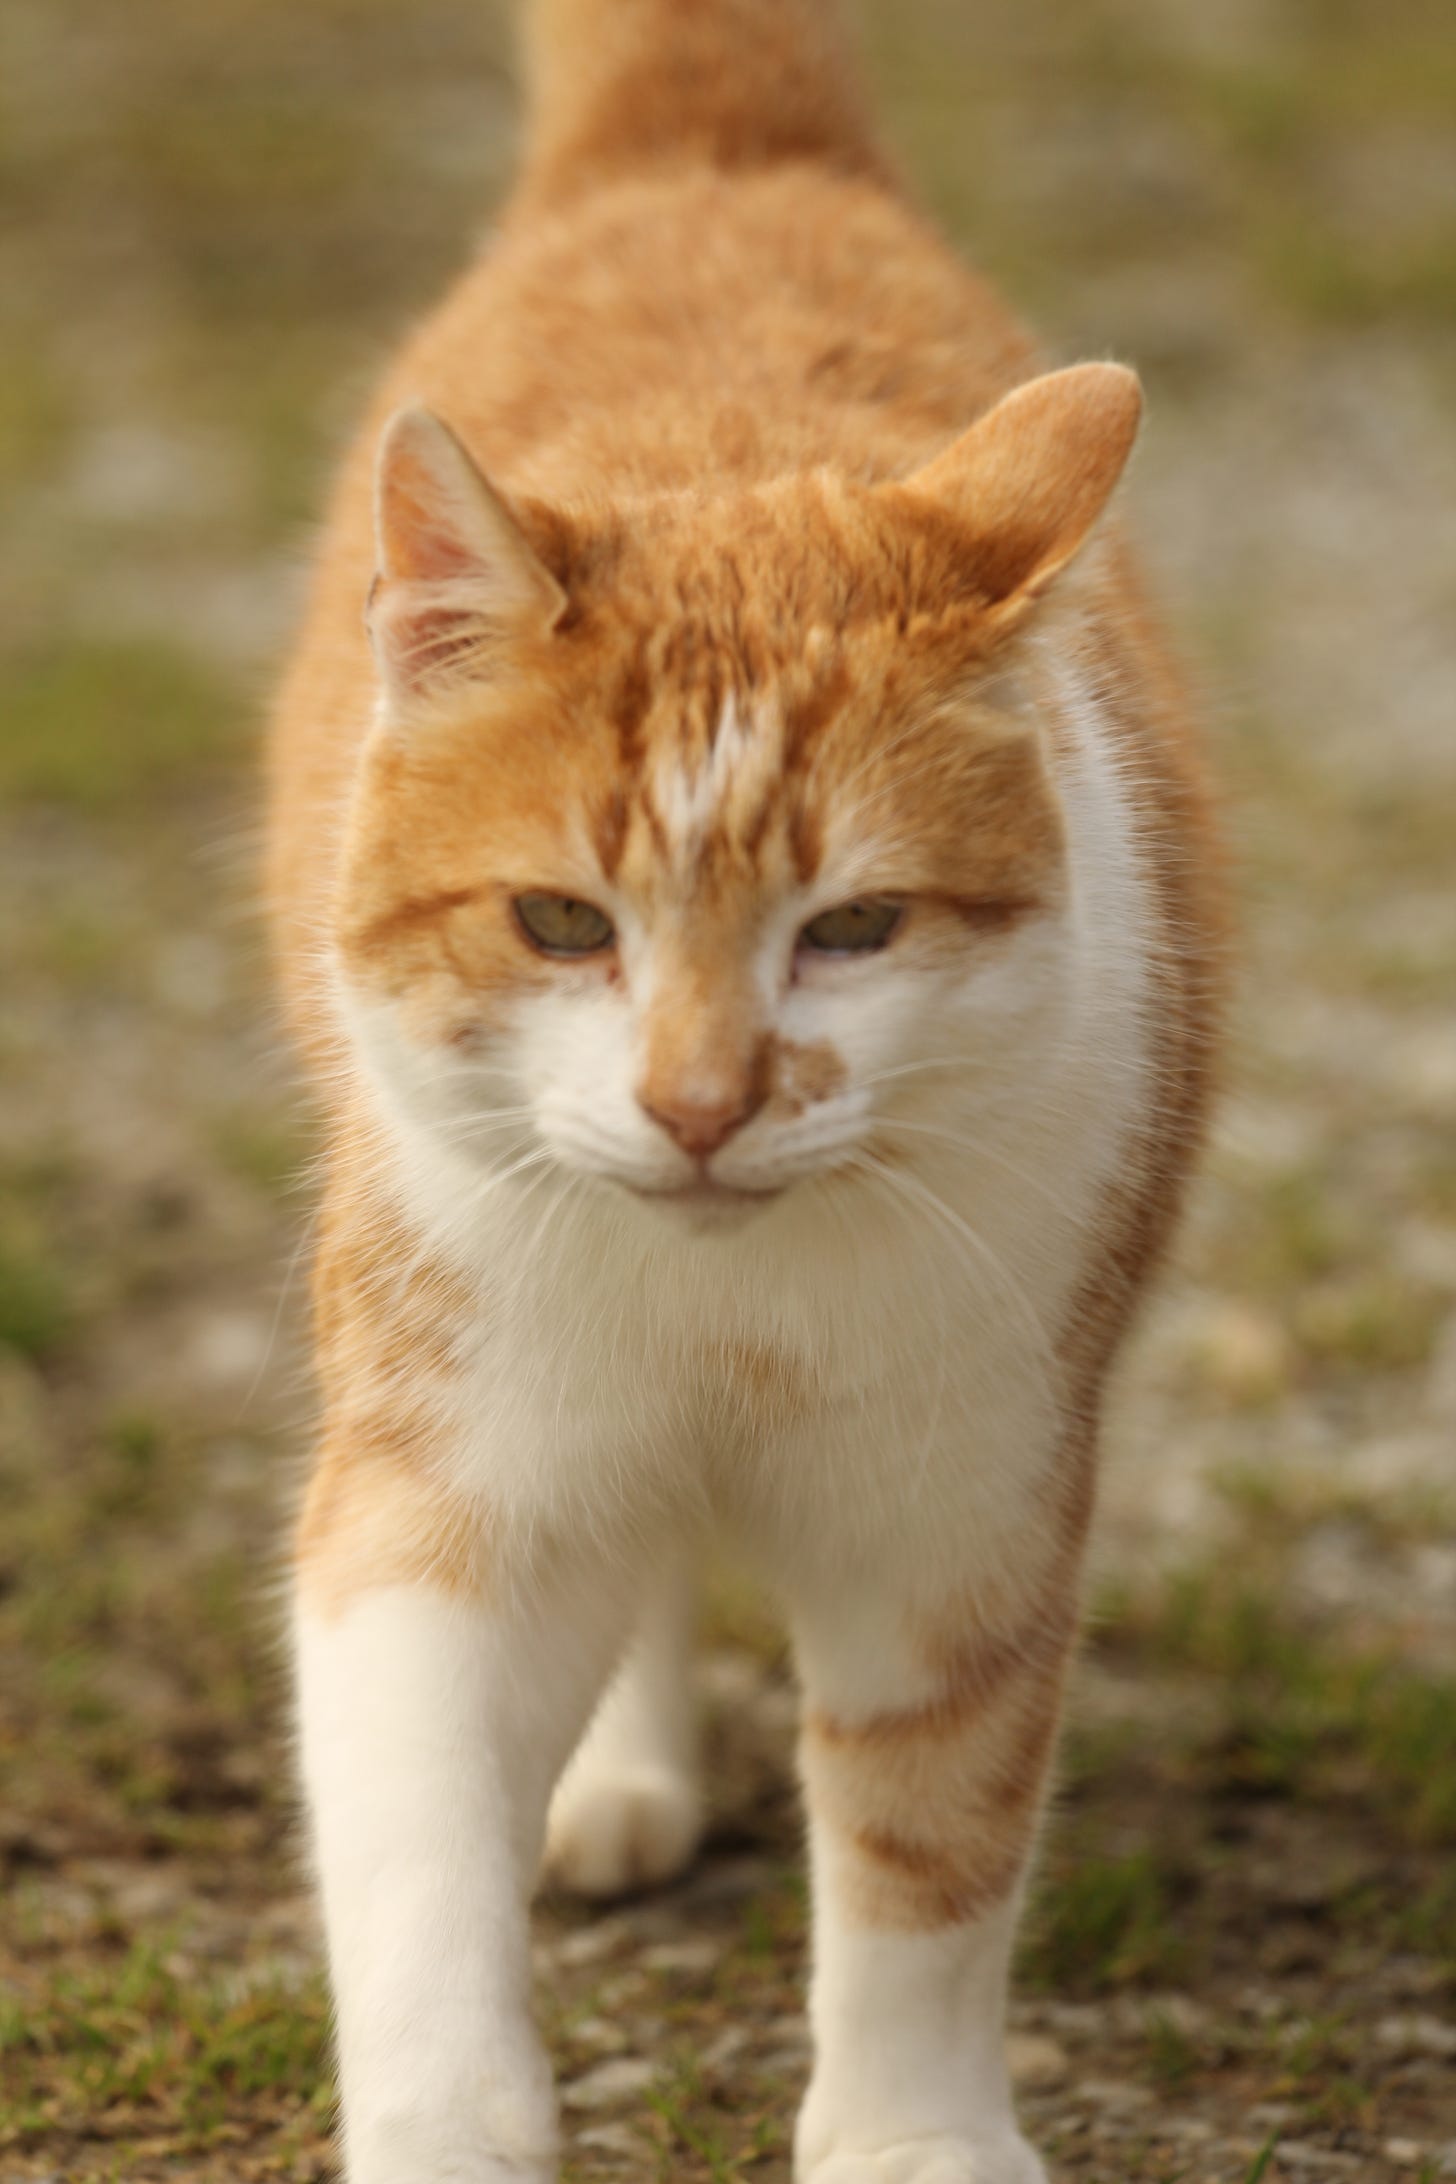 Photograph of a ginger tabby cat, strutting towards the camera.